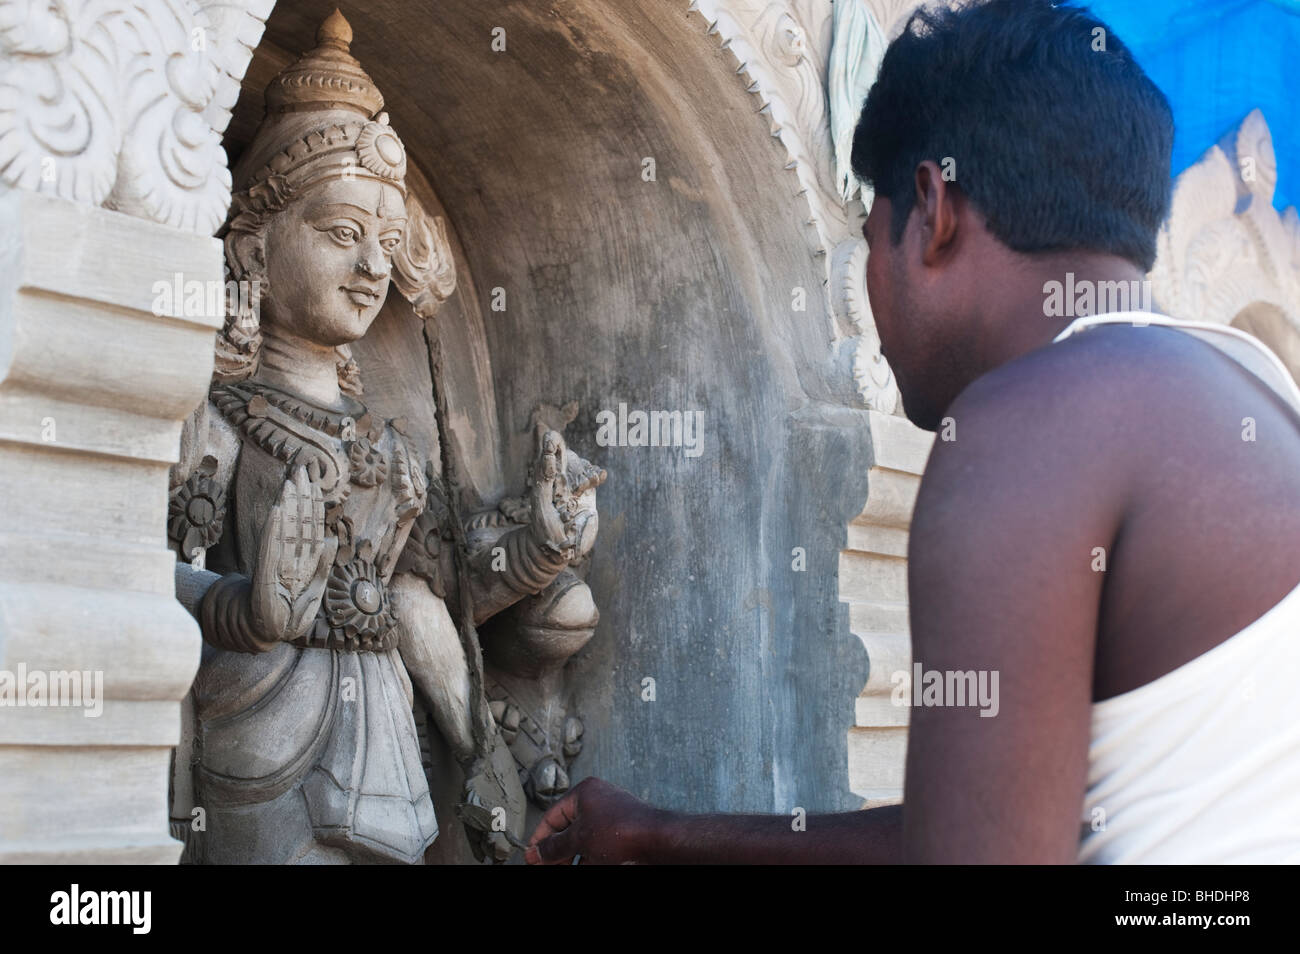 Indian man creating concrete temple deity sculptures on a hindu temple roof. Andhra Pradesh, India Stock Photo